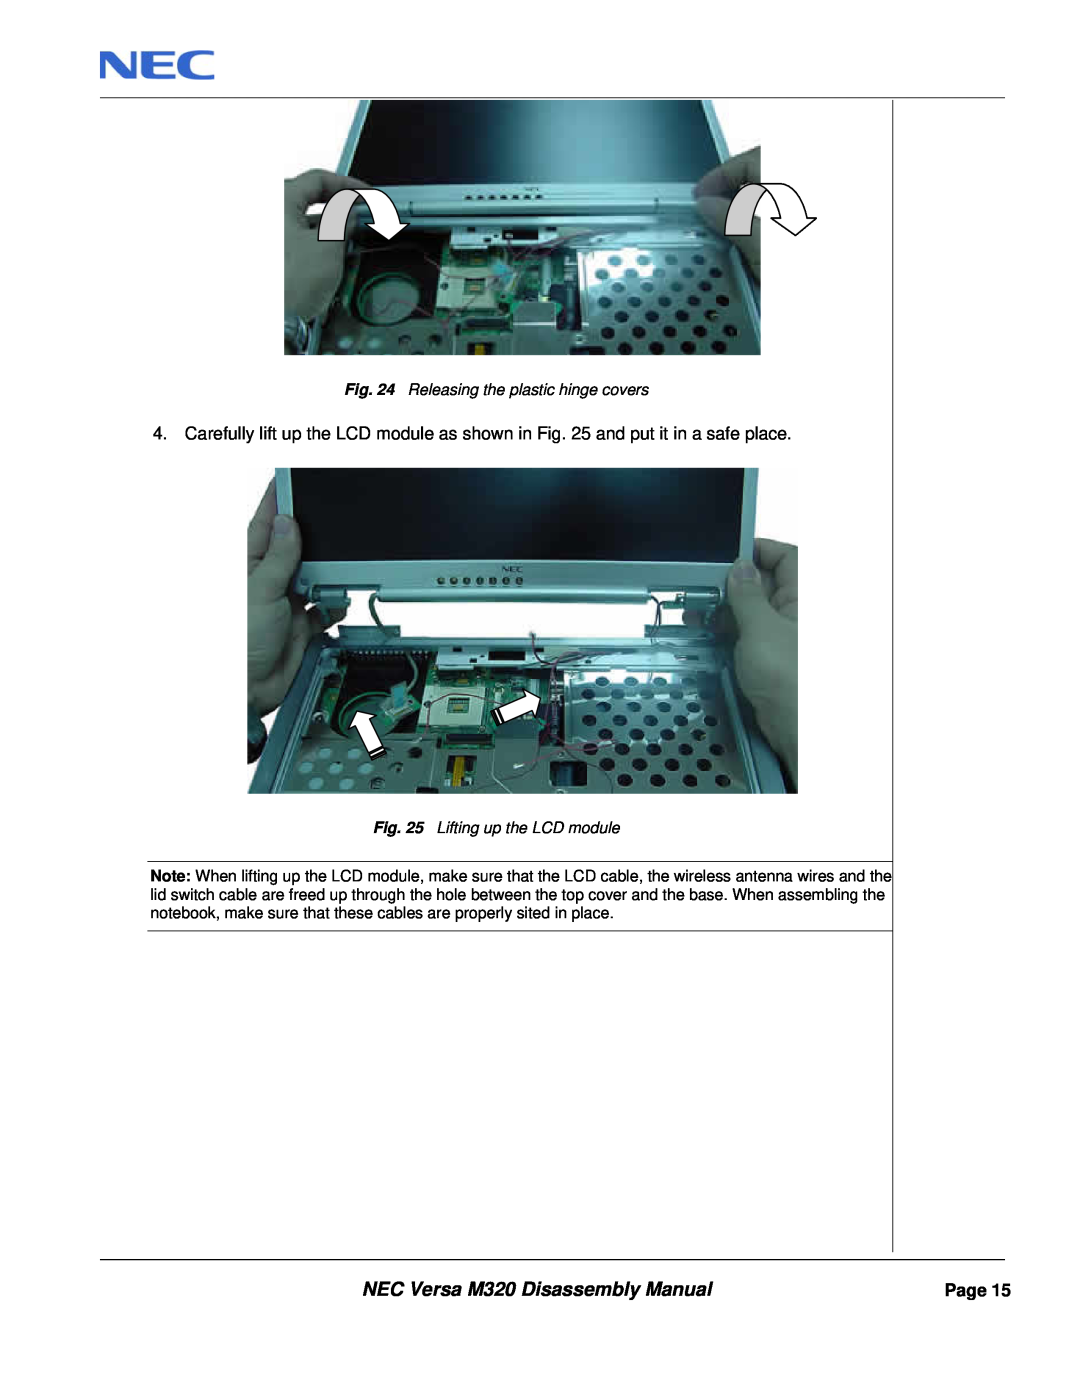 NEC manual NEC Versa M320 Disassembly Manual, Releasing the plastic hinge covers, Lifting up the LCD module, Page 